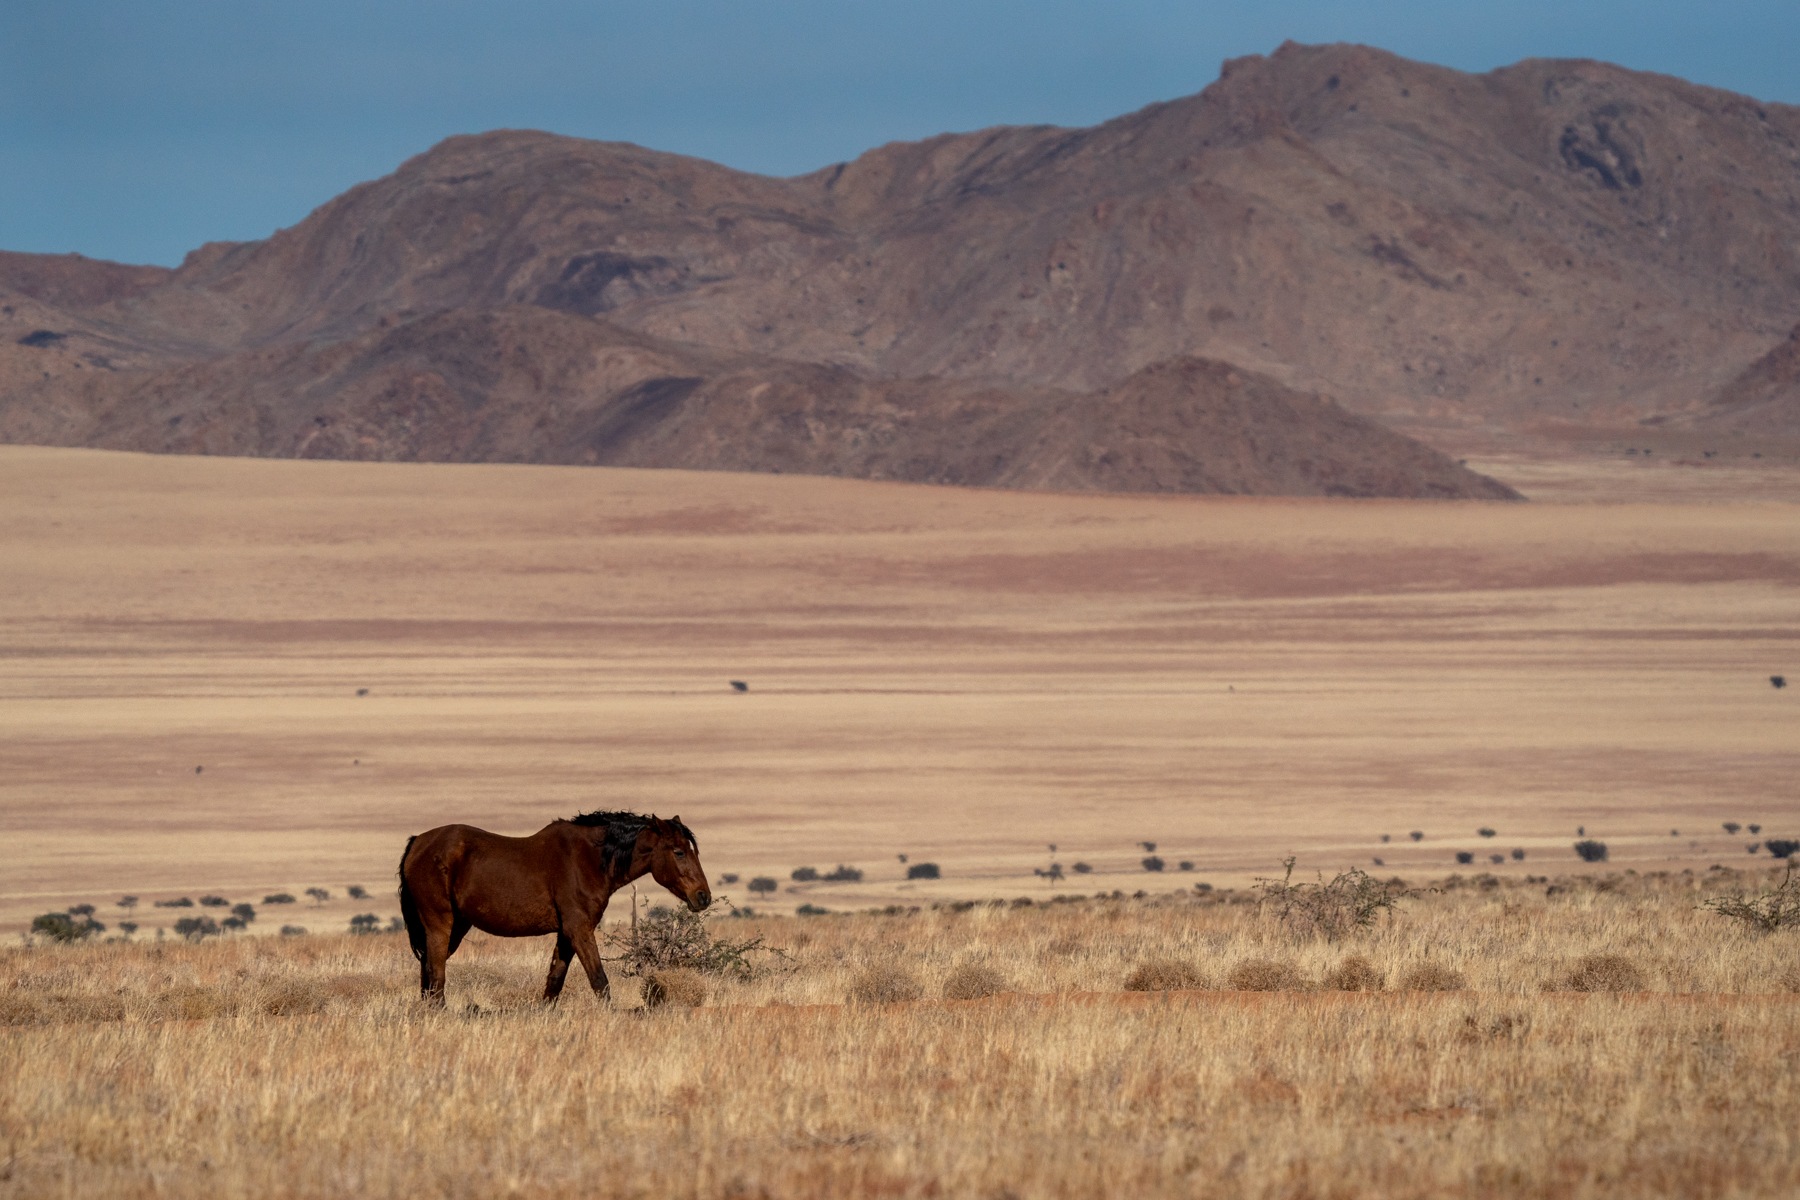 A wild desert horse roams the plains of Tsau Khaeb in southern Namibia during our wildlife photography tour